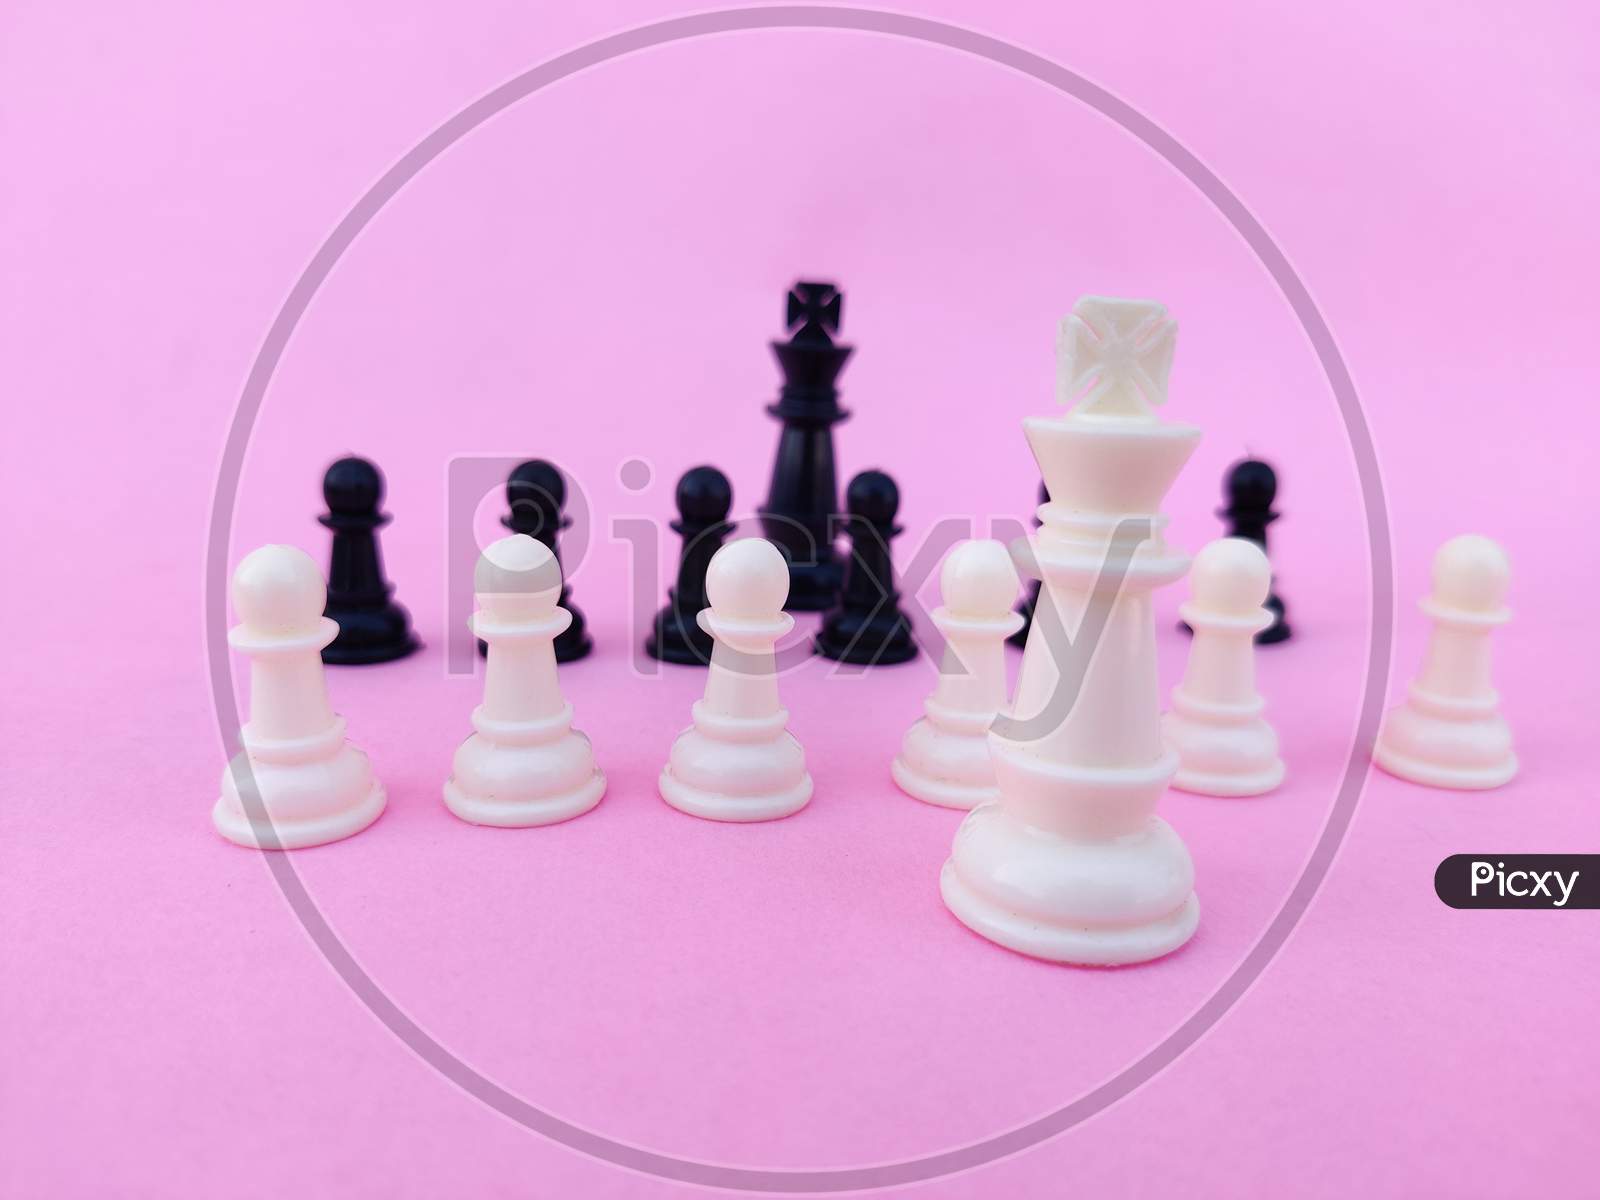 Black Chess Pieces Like King,Pawn And White Chess Pieces Like King And Pawn .Isolated On Pink Background.